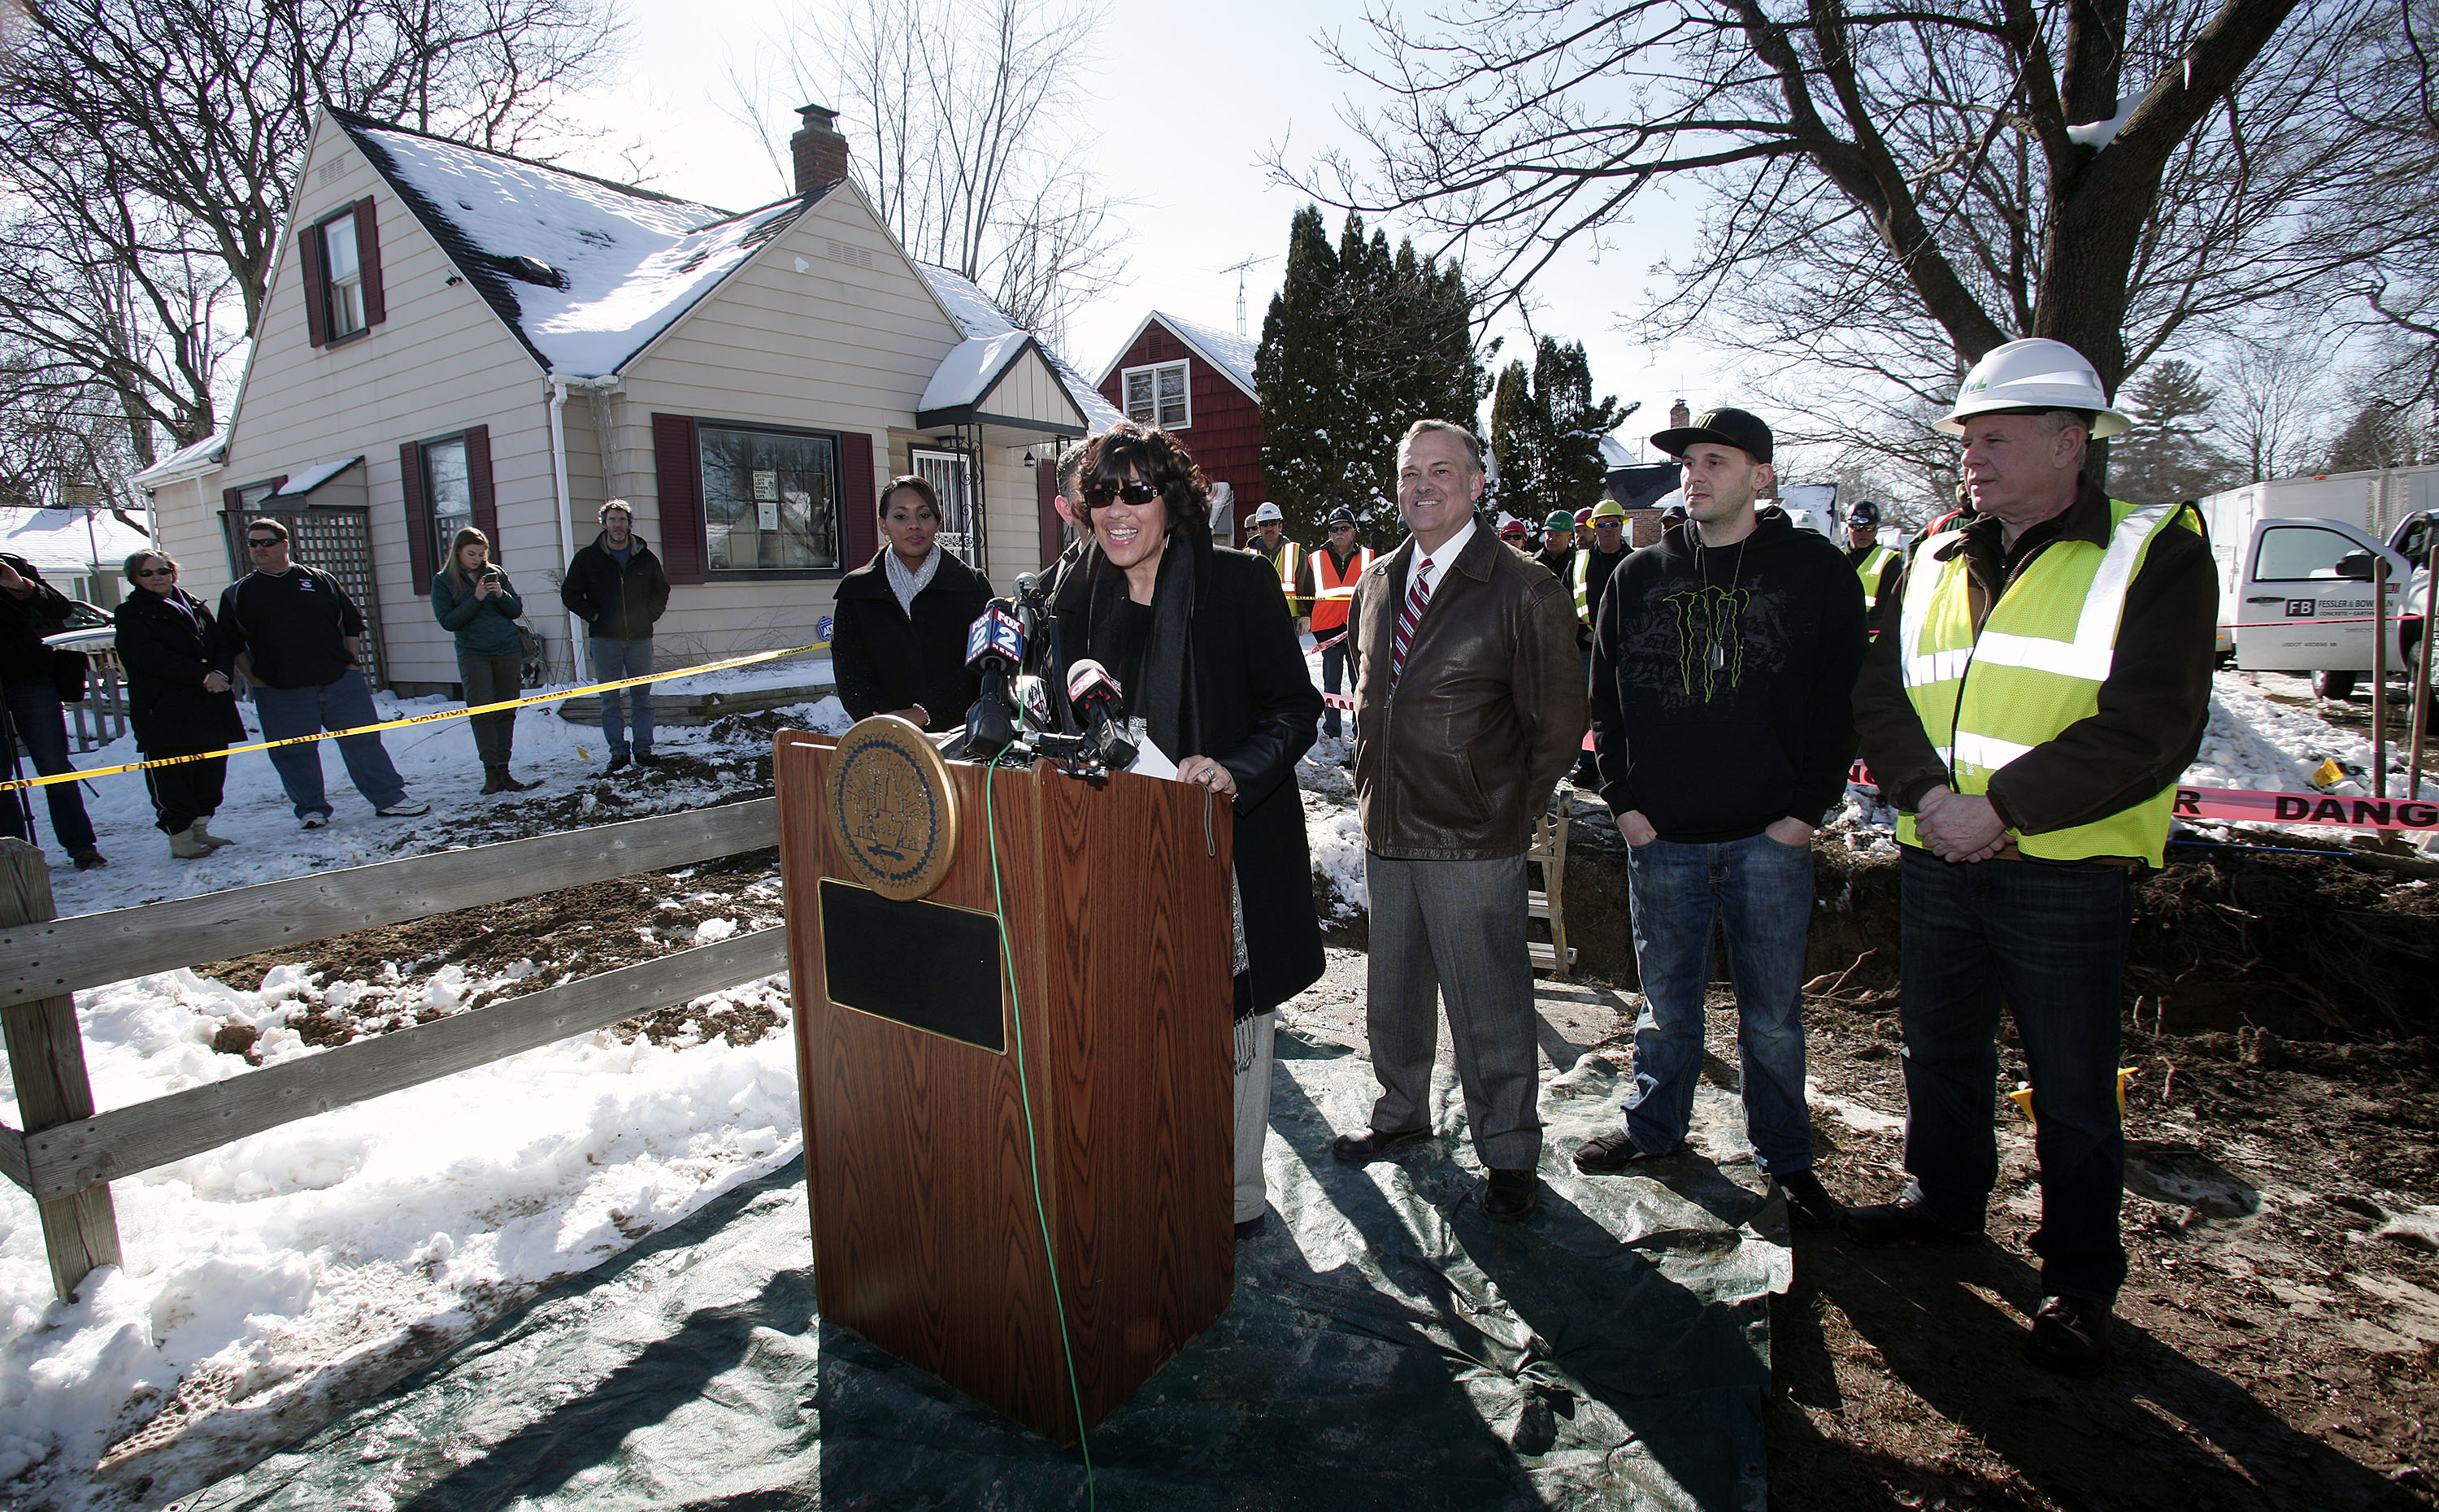 FLINT, MI - MARCH 4: City of Flint , Michigan Mayor Karen Weaver holds a press conference at the site of the first Flint home with high lead levels to have its lead service line replaced under the Mayor's Fast Start program, marking the beginning of work to replace all the lead water pipes in the city. The lead line will be replaced with a copper one by work crews. March 5, 2016 in Flint, Michigan. (Photo by Bill Pugliano/Getty Images) (Bill Pugliano–Getty Images)